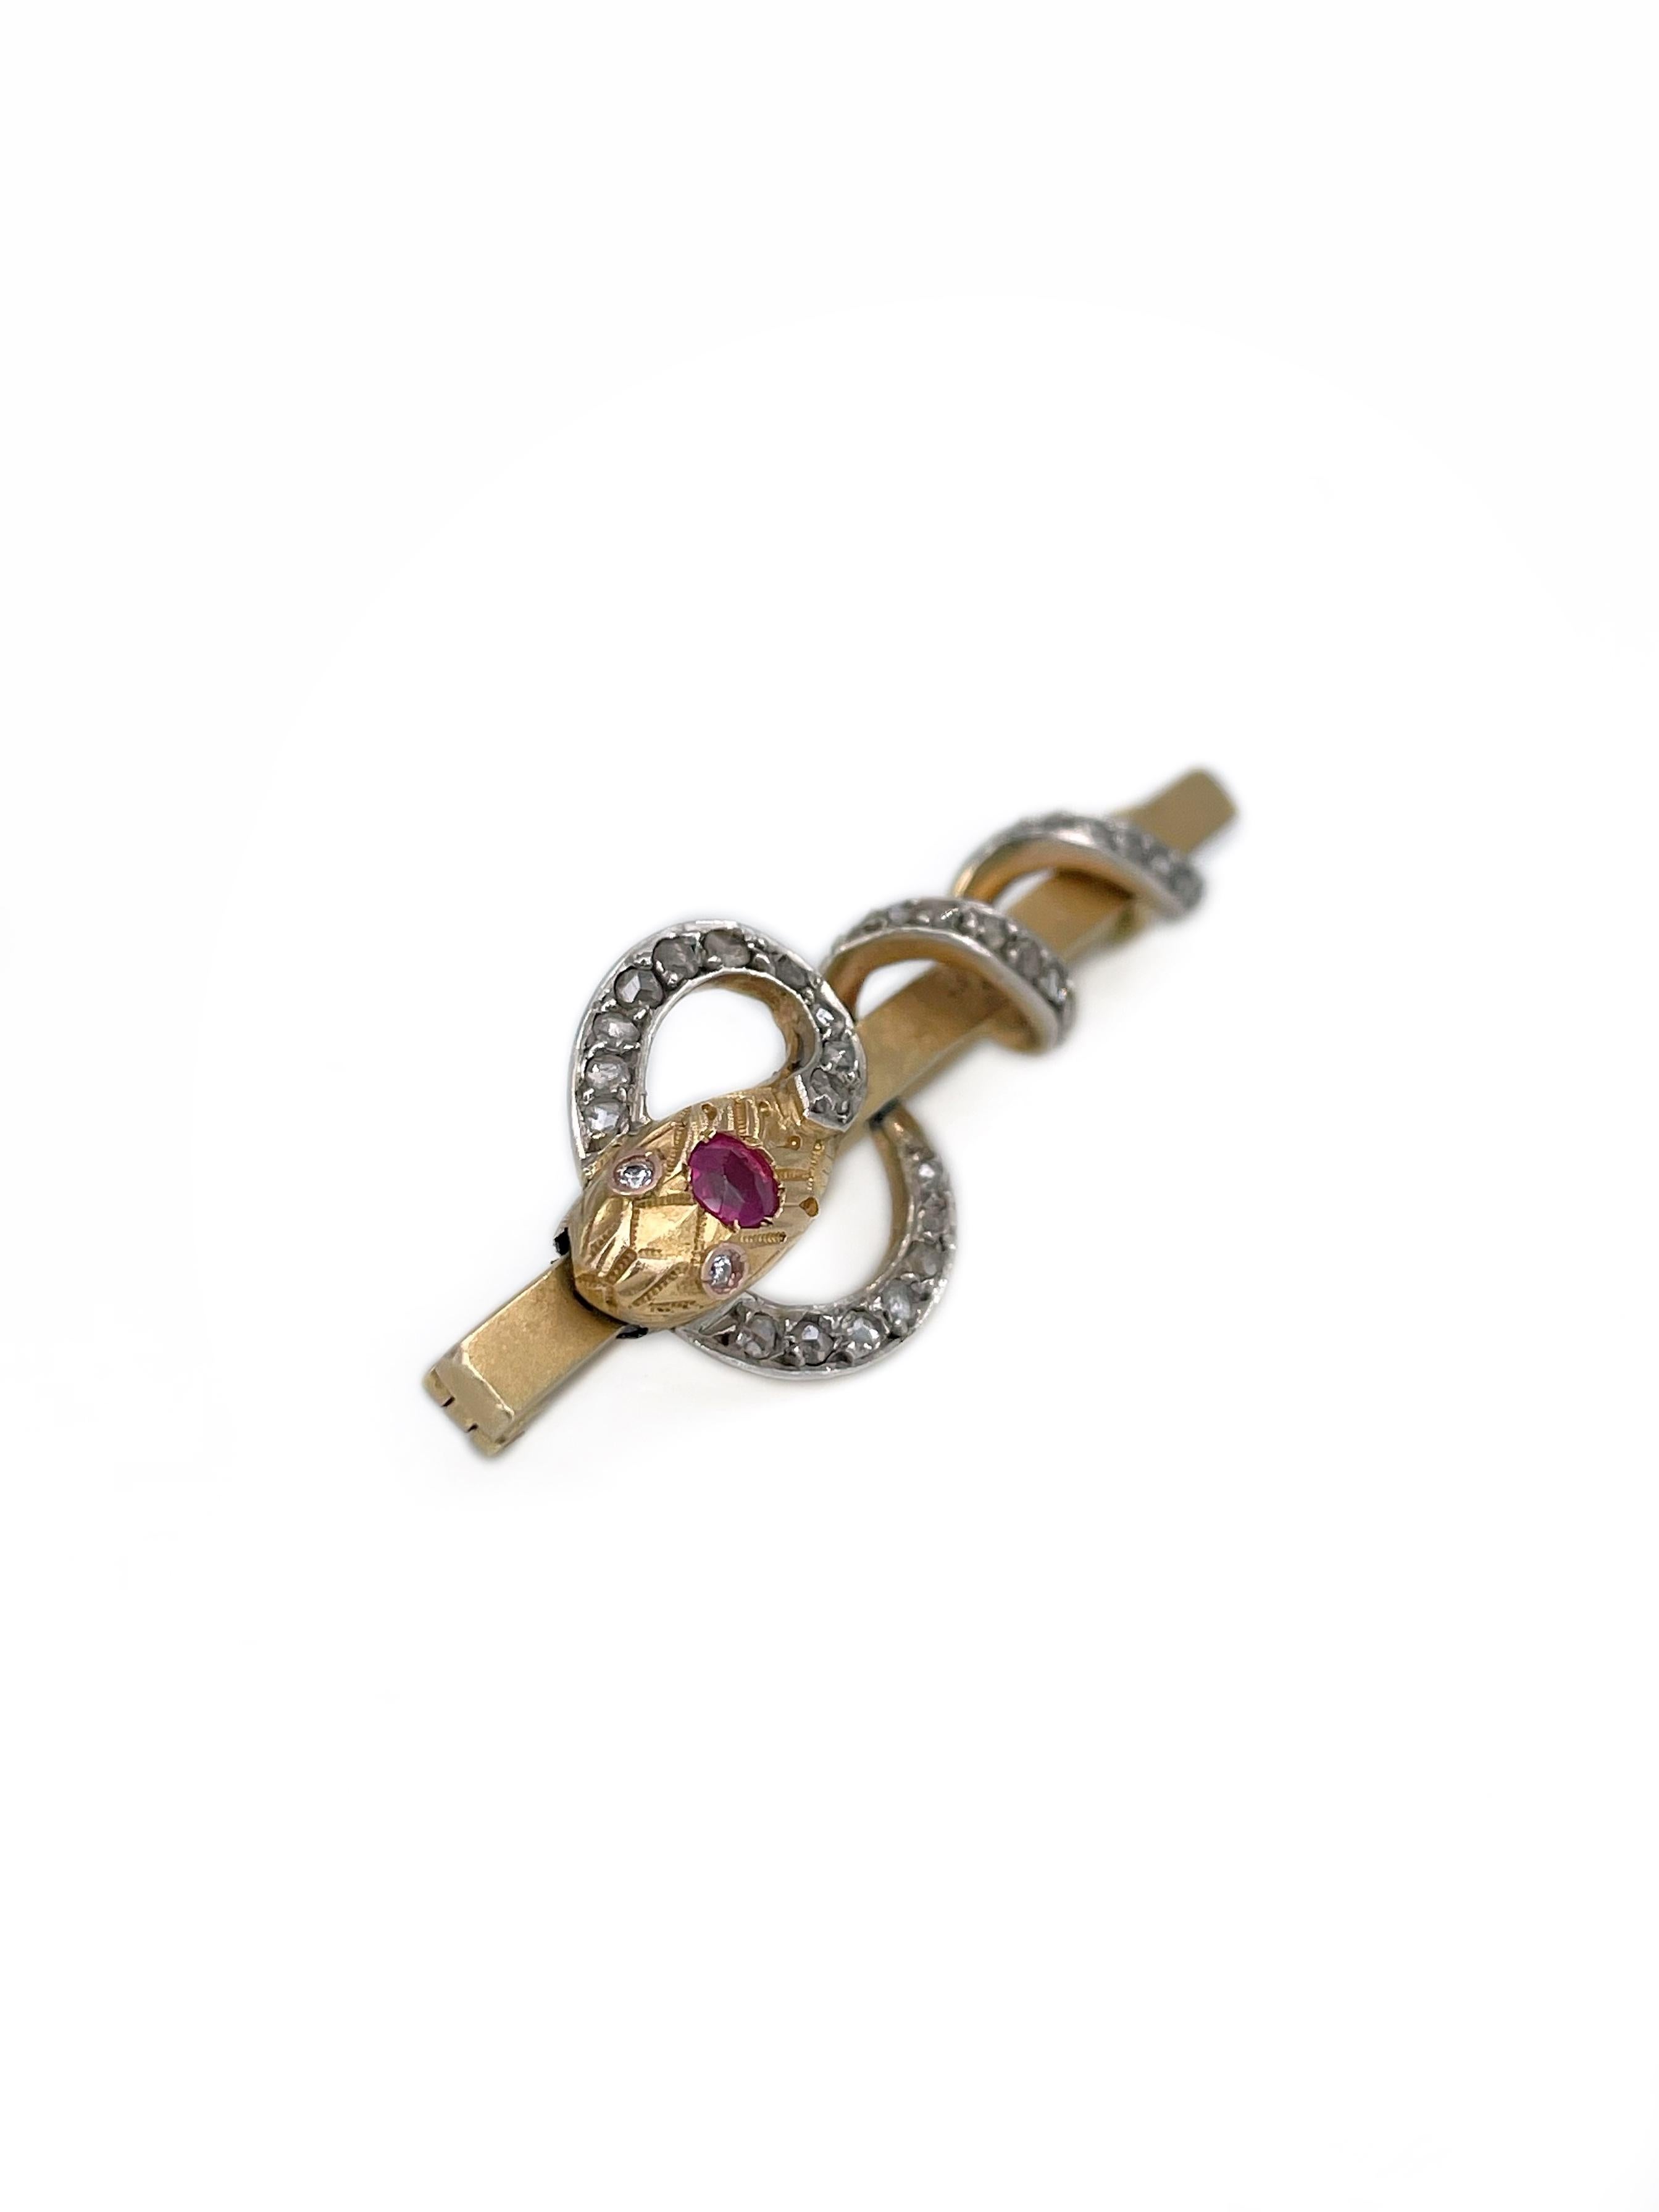 This is a Victorian snake bar brooch crafted in 18K gold.  Circa 1890.

The piece features ruby and rose cut diamonds. Eyes are encrusted with 2 round cut diamonds. 

Has a C clasp. 

Serpents were highly symbolic during the Victorian era, often